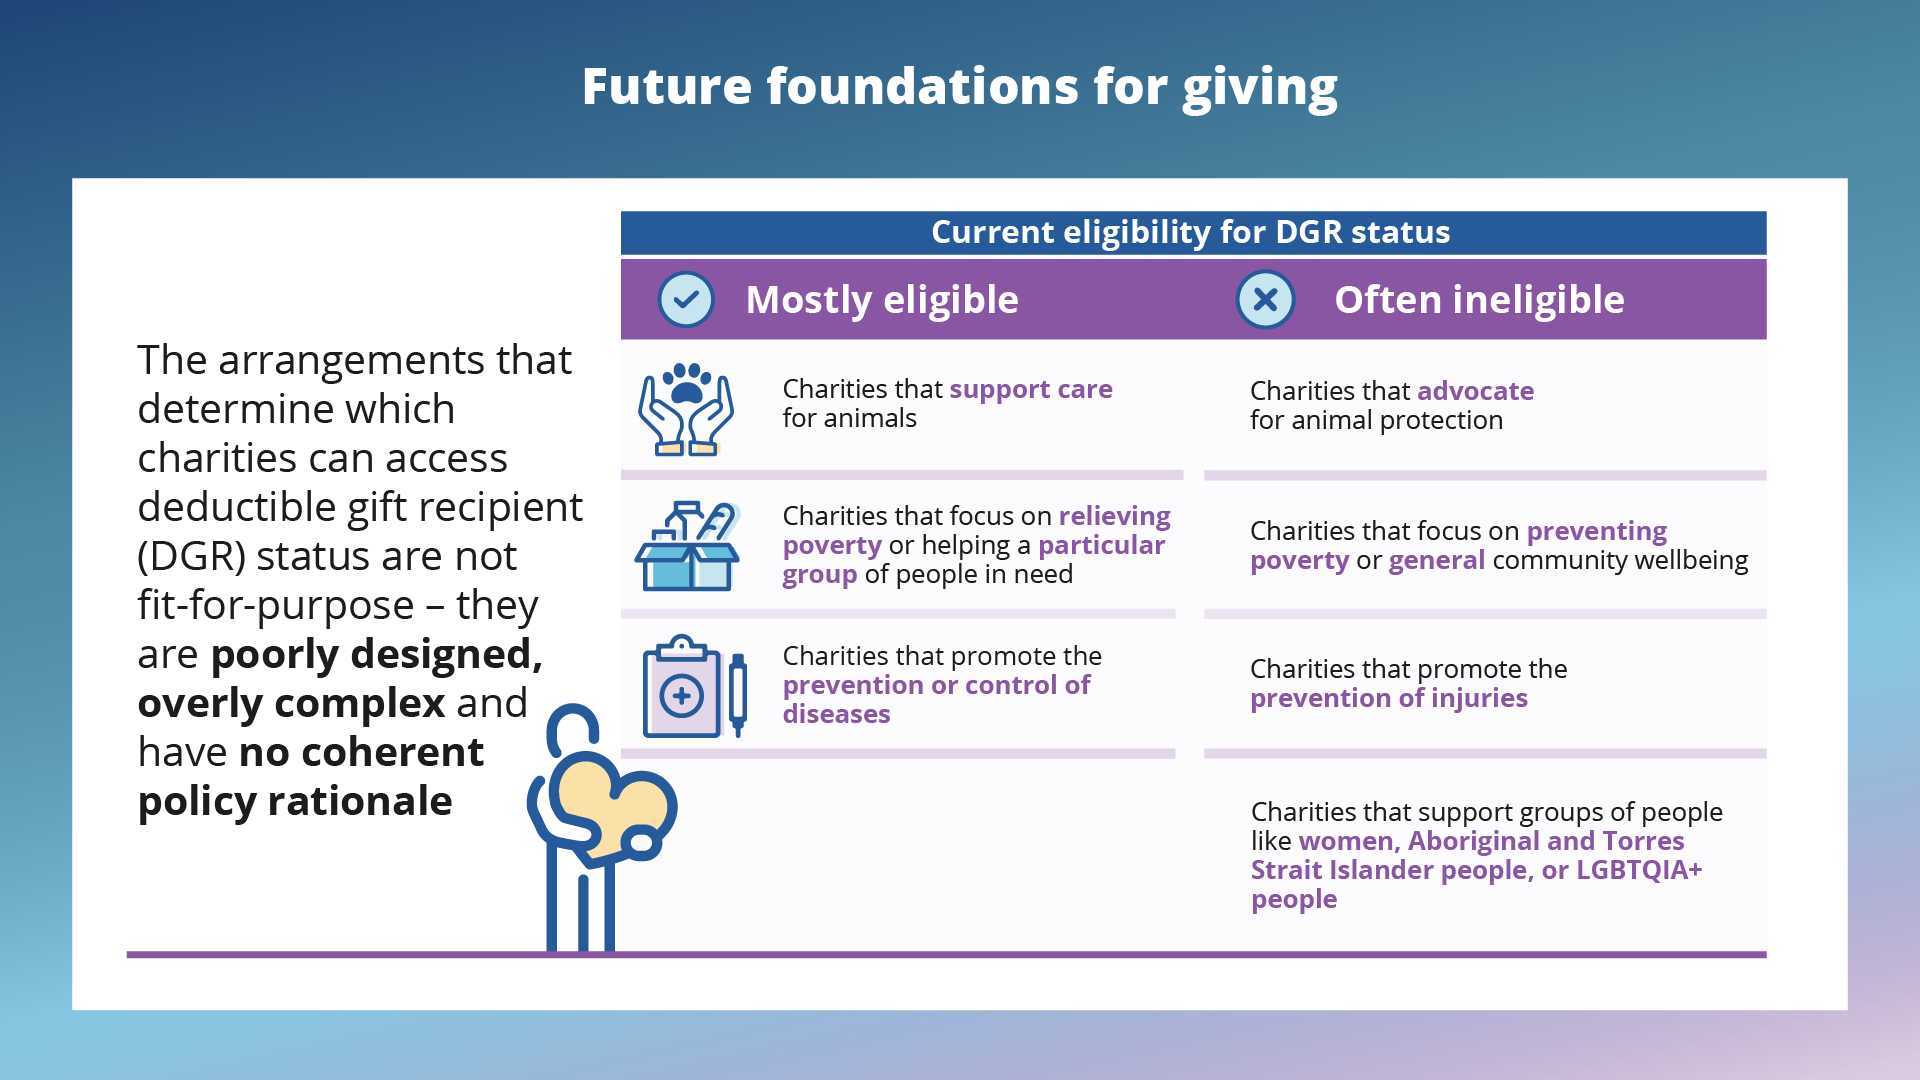 The arrangements that determine which charities can access deductible gift recipient (DGR) status are not fit-for-purpose – they are poorly designed, overly complex and have no coherent policy rationale. Current eligibility for DGR status. Mostly eligible. Charities that support care for animals. Charities that focus on relieving poverty or helping a particular group of people in need. Charities that promote the prevention or control of diseases. Often ineligible. Charities that advocate for animal protection. Charities that focus on preventing poverty or general community wellbeing.
Charities that promote the prevention of injuries. Charities that support groups of people like women, Aboriginal and Torres Strait Islander people, or LGBTQIA+ people.